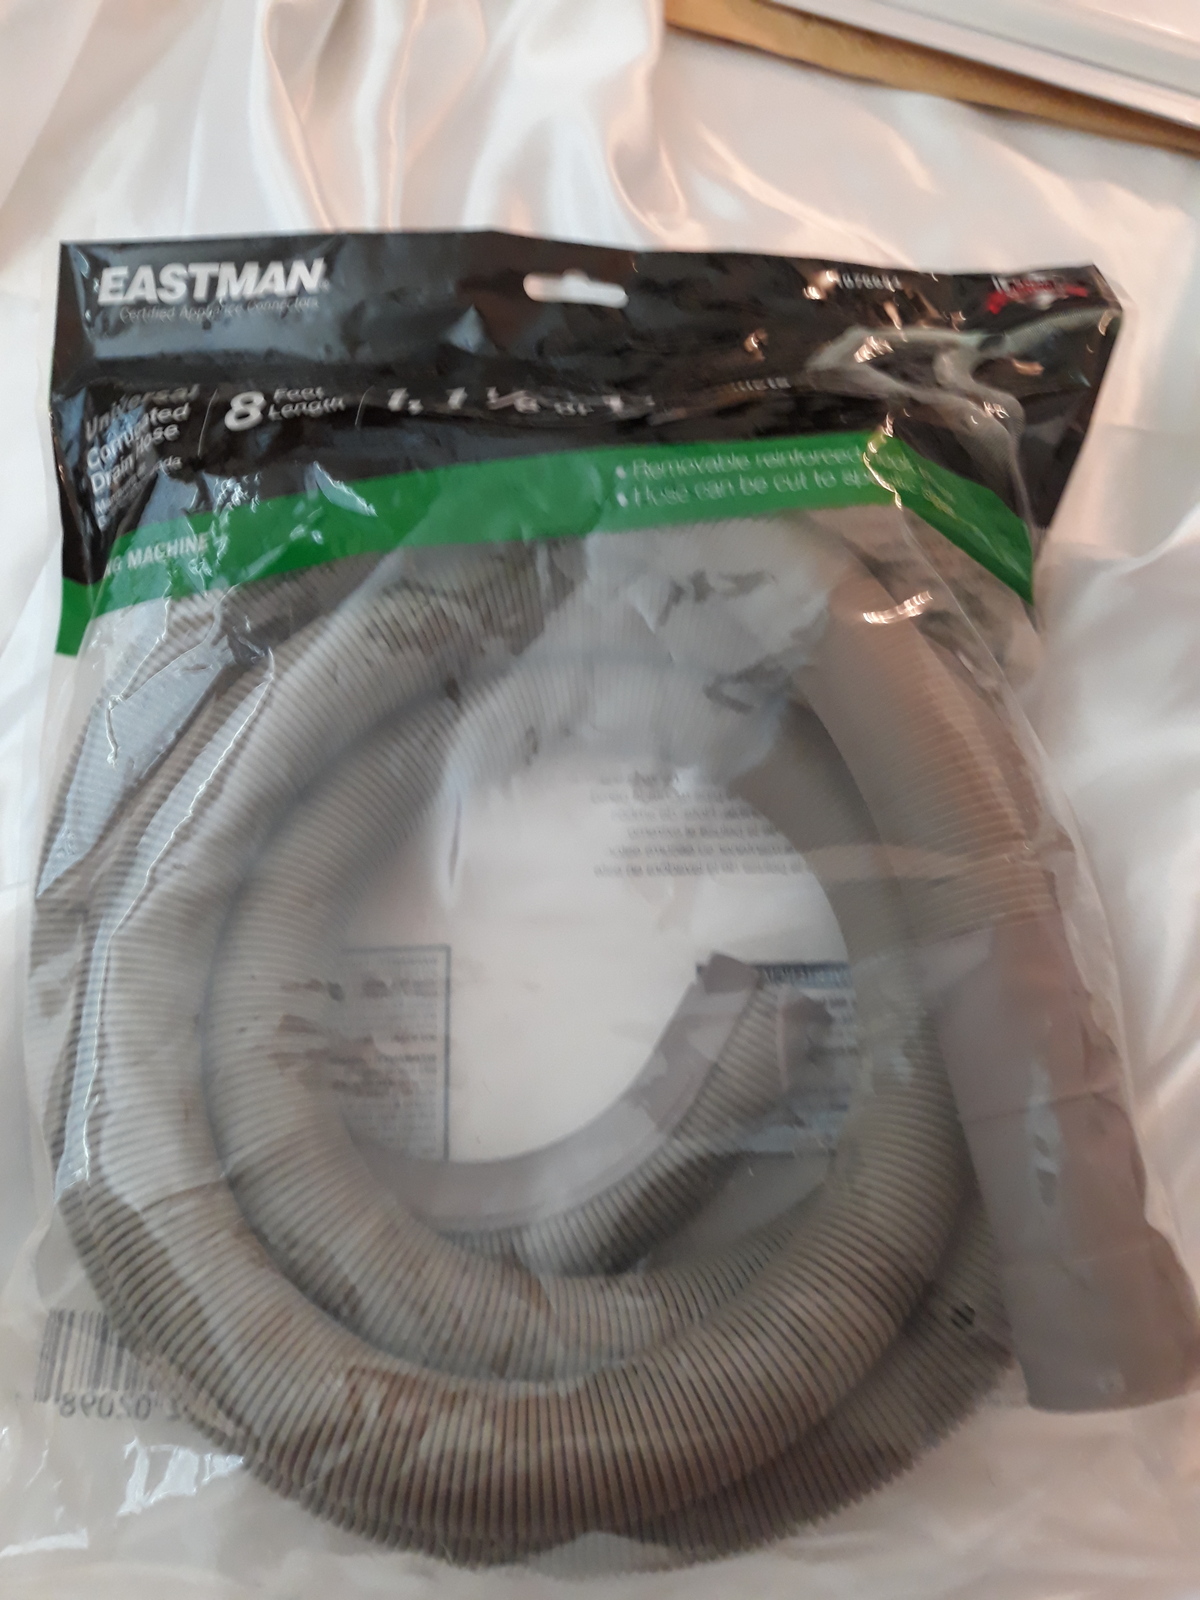 EASTMAN  8-ft 1-in OD Inlet x 1-in, 1-1/8-in, 1-1/4-in-in Outlet Washing Machine - $18.00